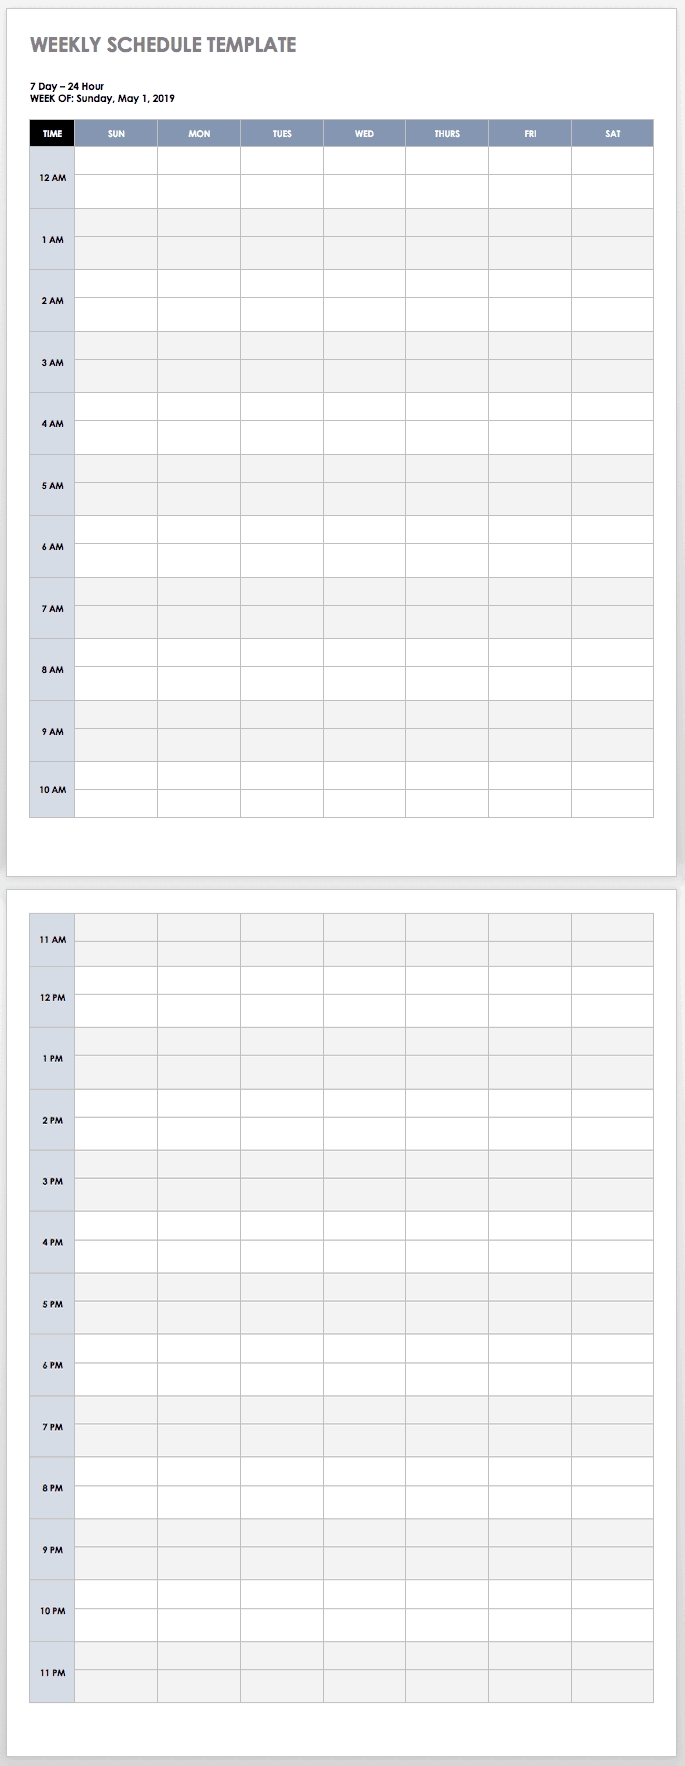 Catch Printable Calendar With Time Slots Worksheets